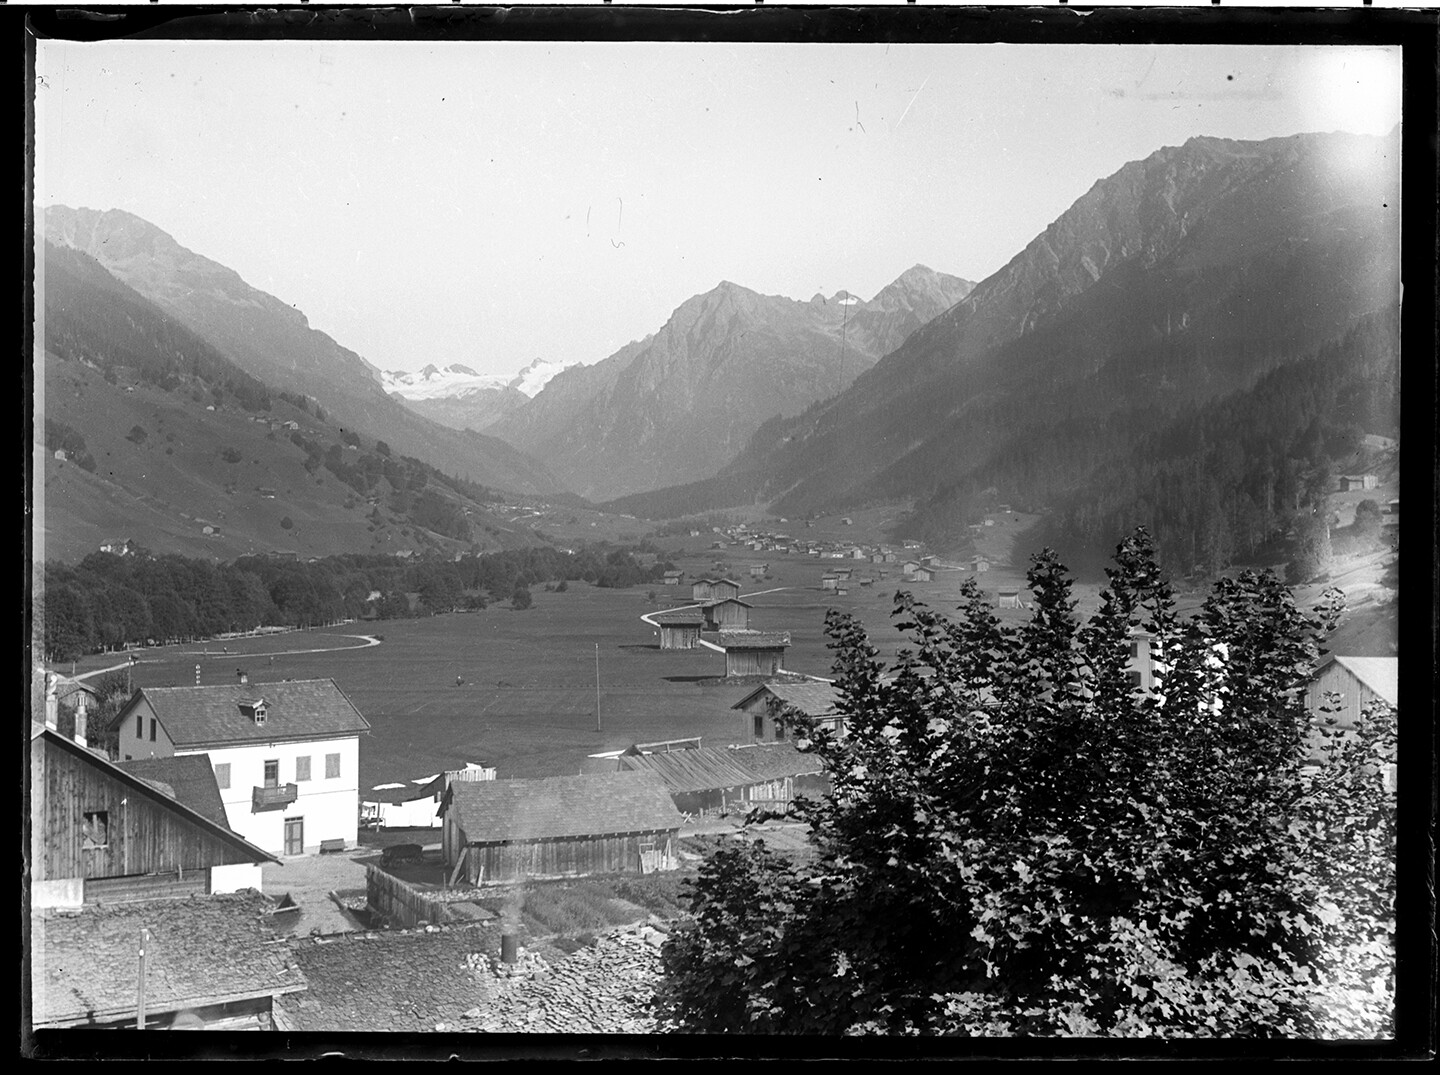 Aussicht vom Fenster des Hotel Vereina in Klosters (September 1898), 86474_o (DRM CC BY-NC-SA)